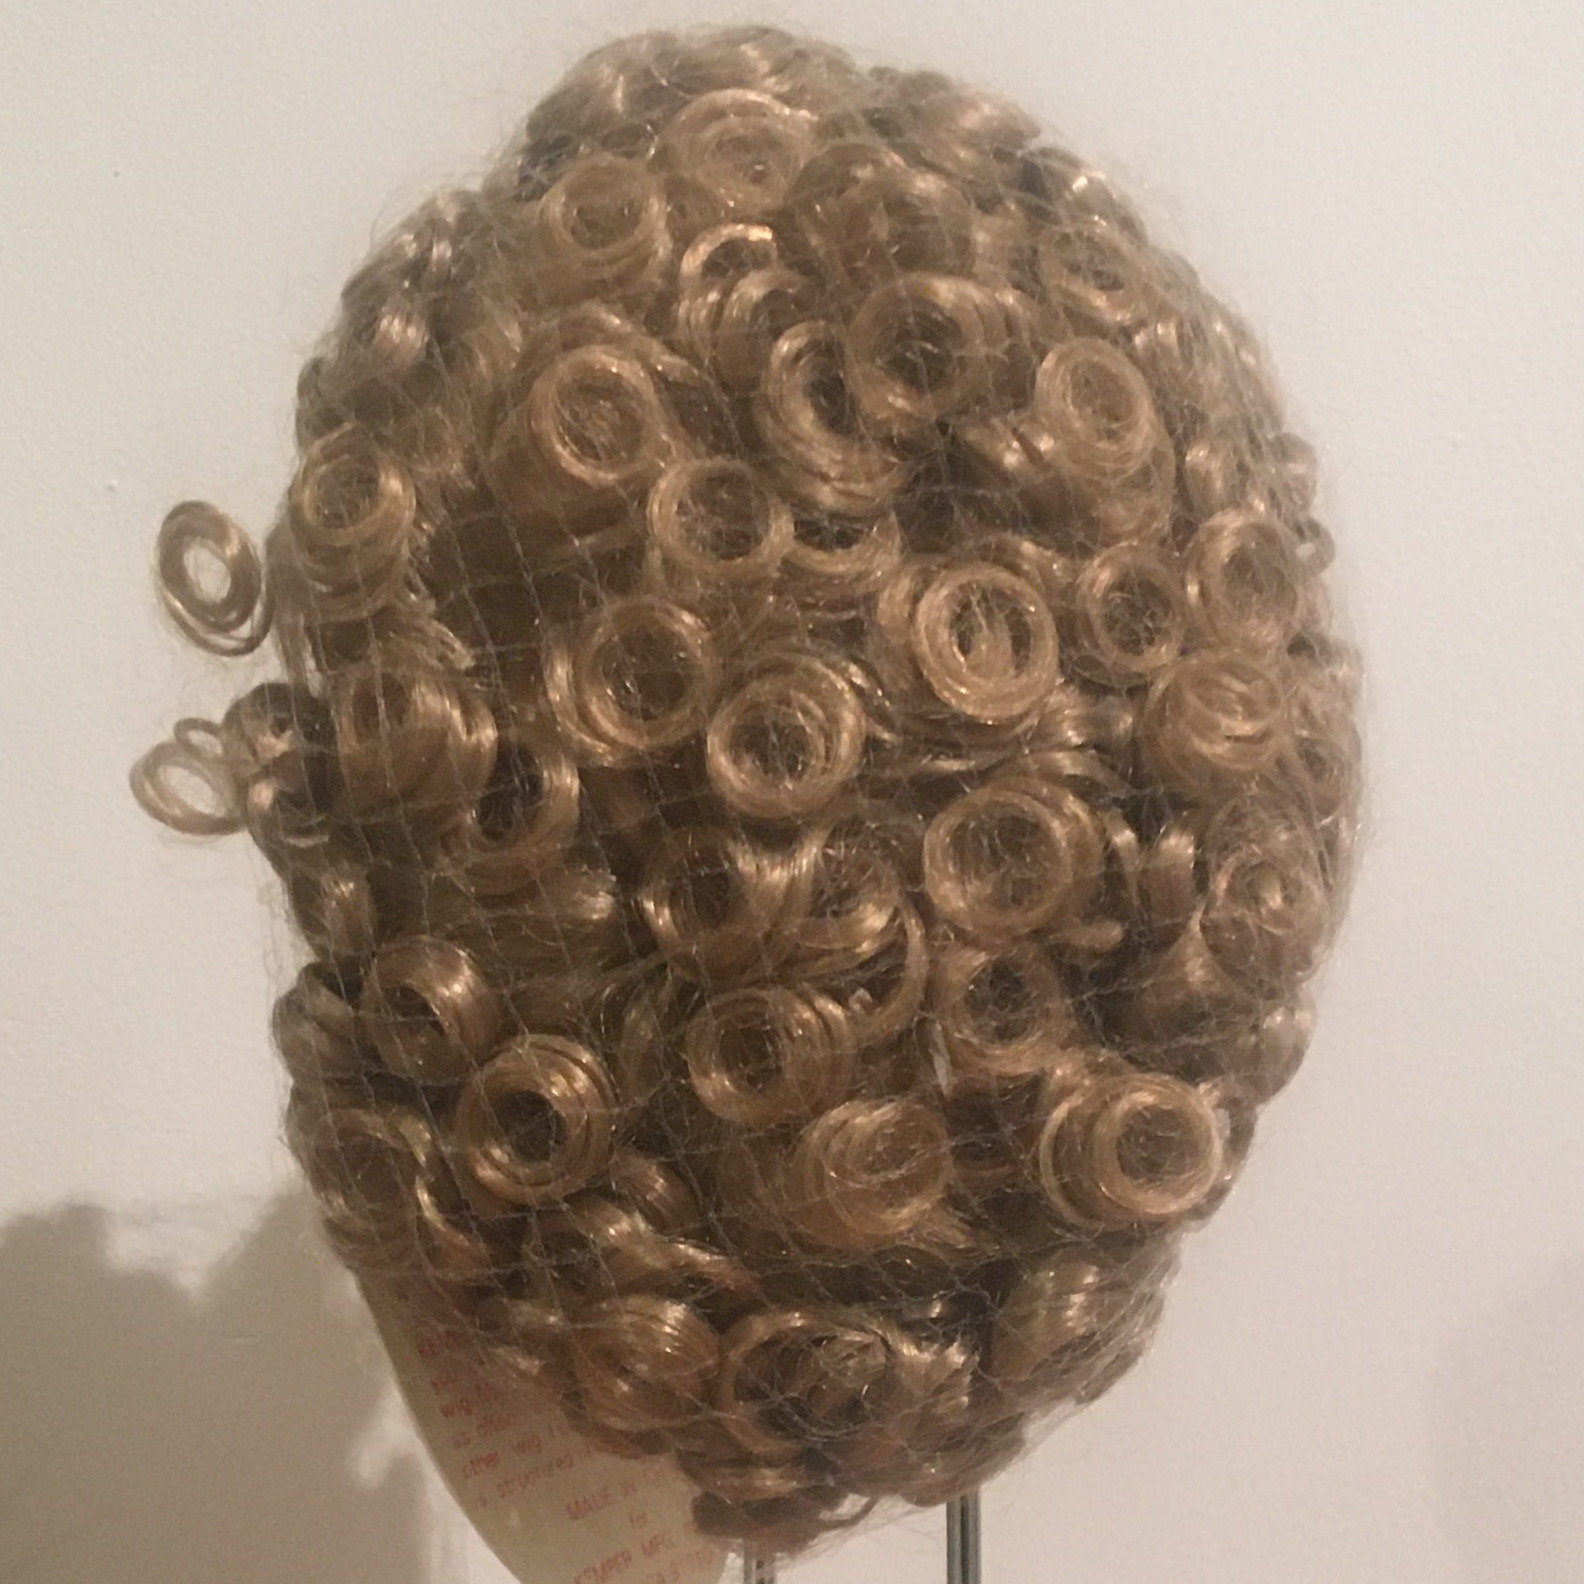 Light brown wig with short, tight curls, contained in a hair net, with a few curls protruding